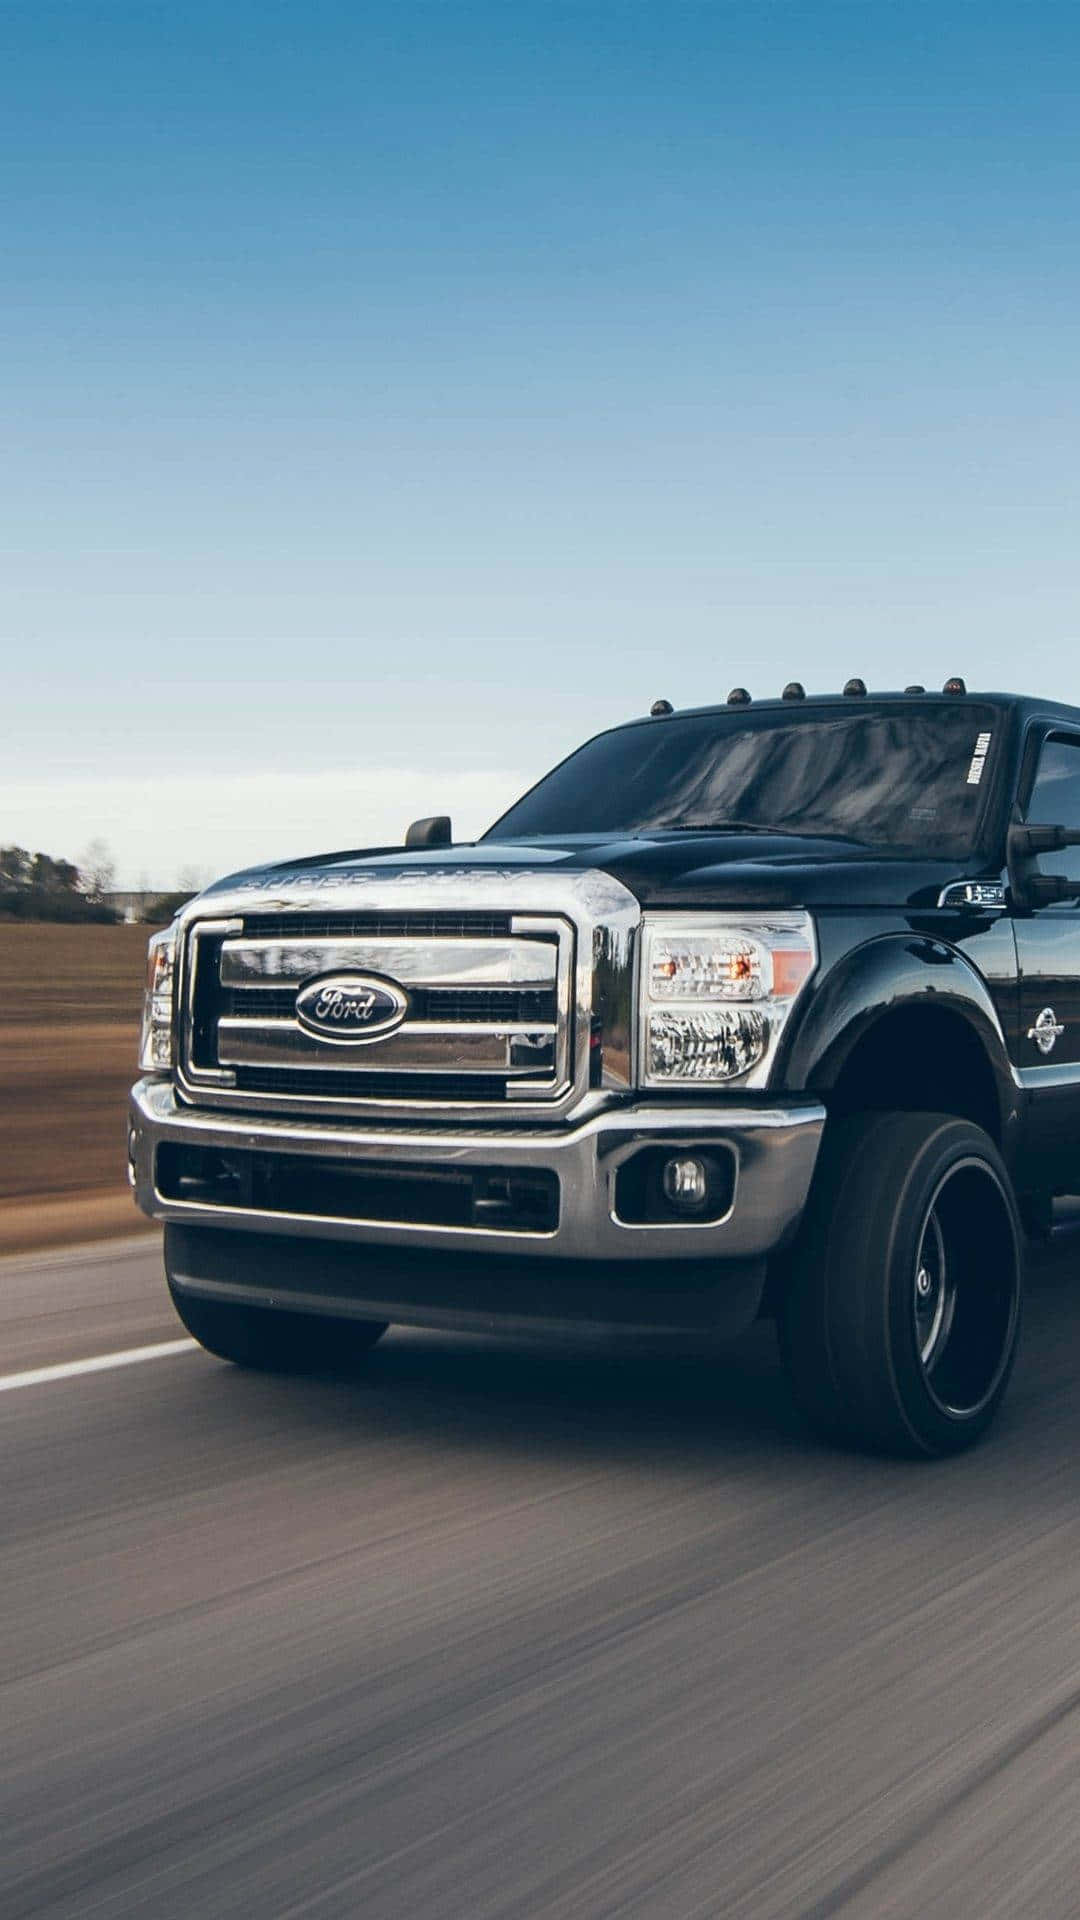 A Black Ford Super Duty Truck Is Driving Down The Road